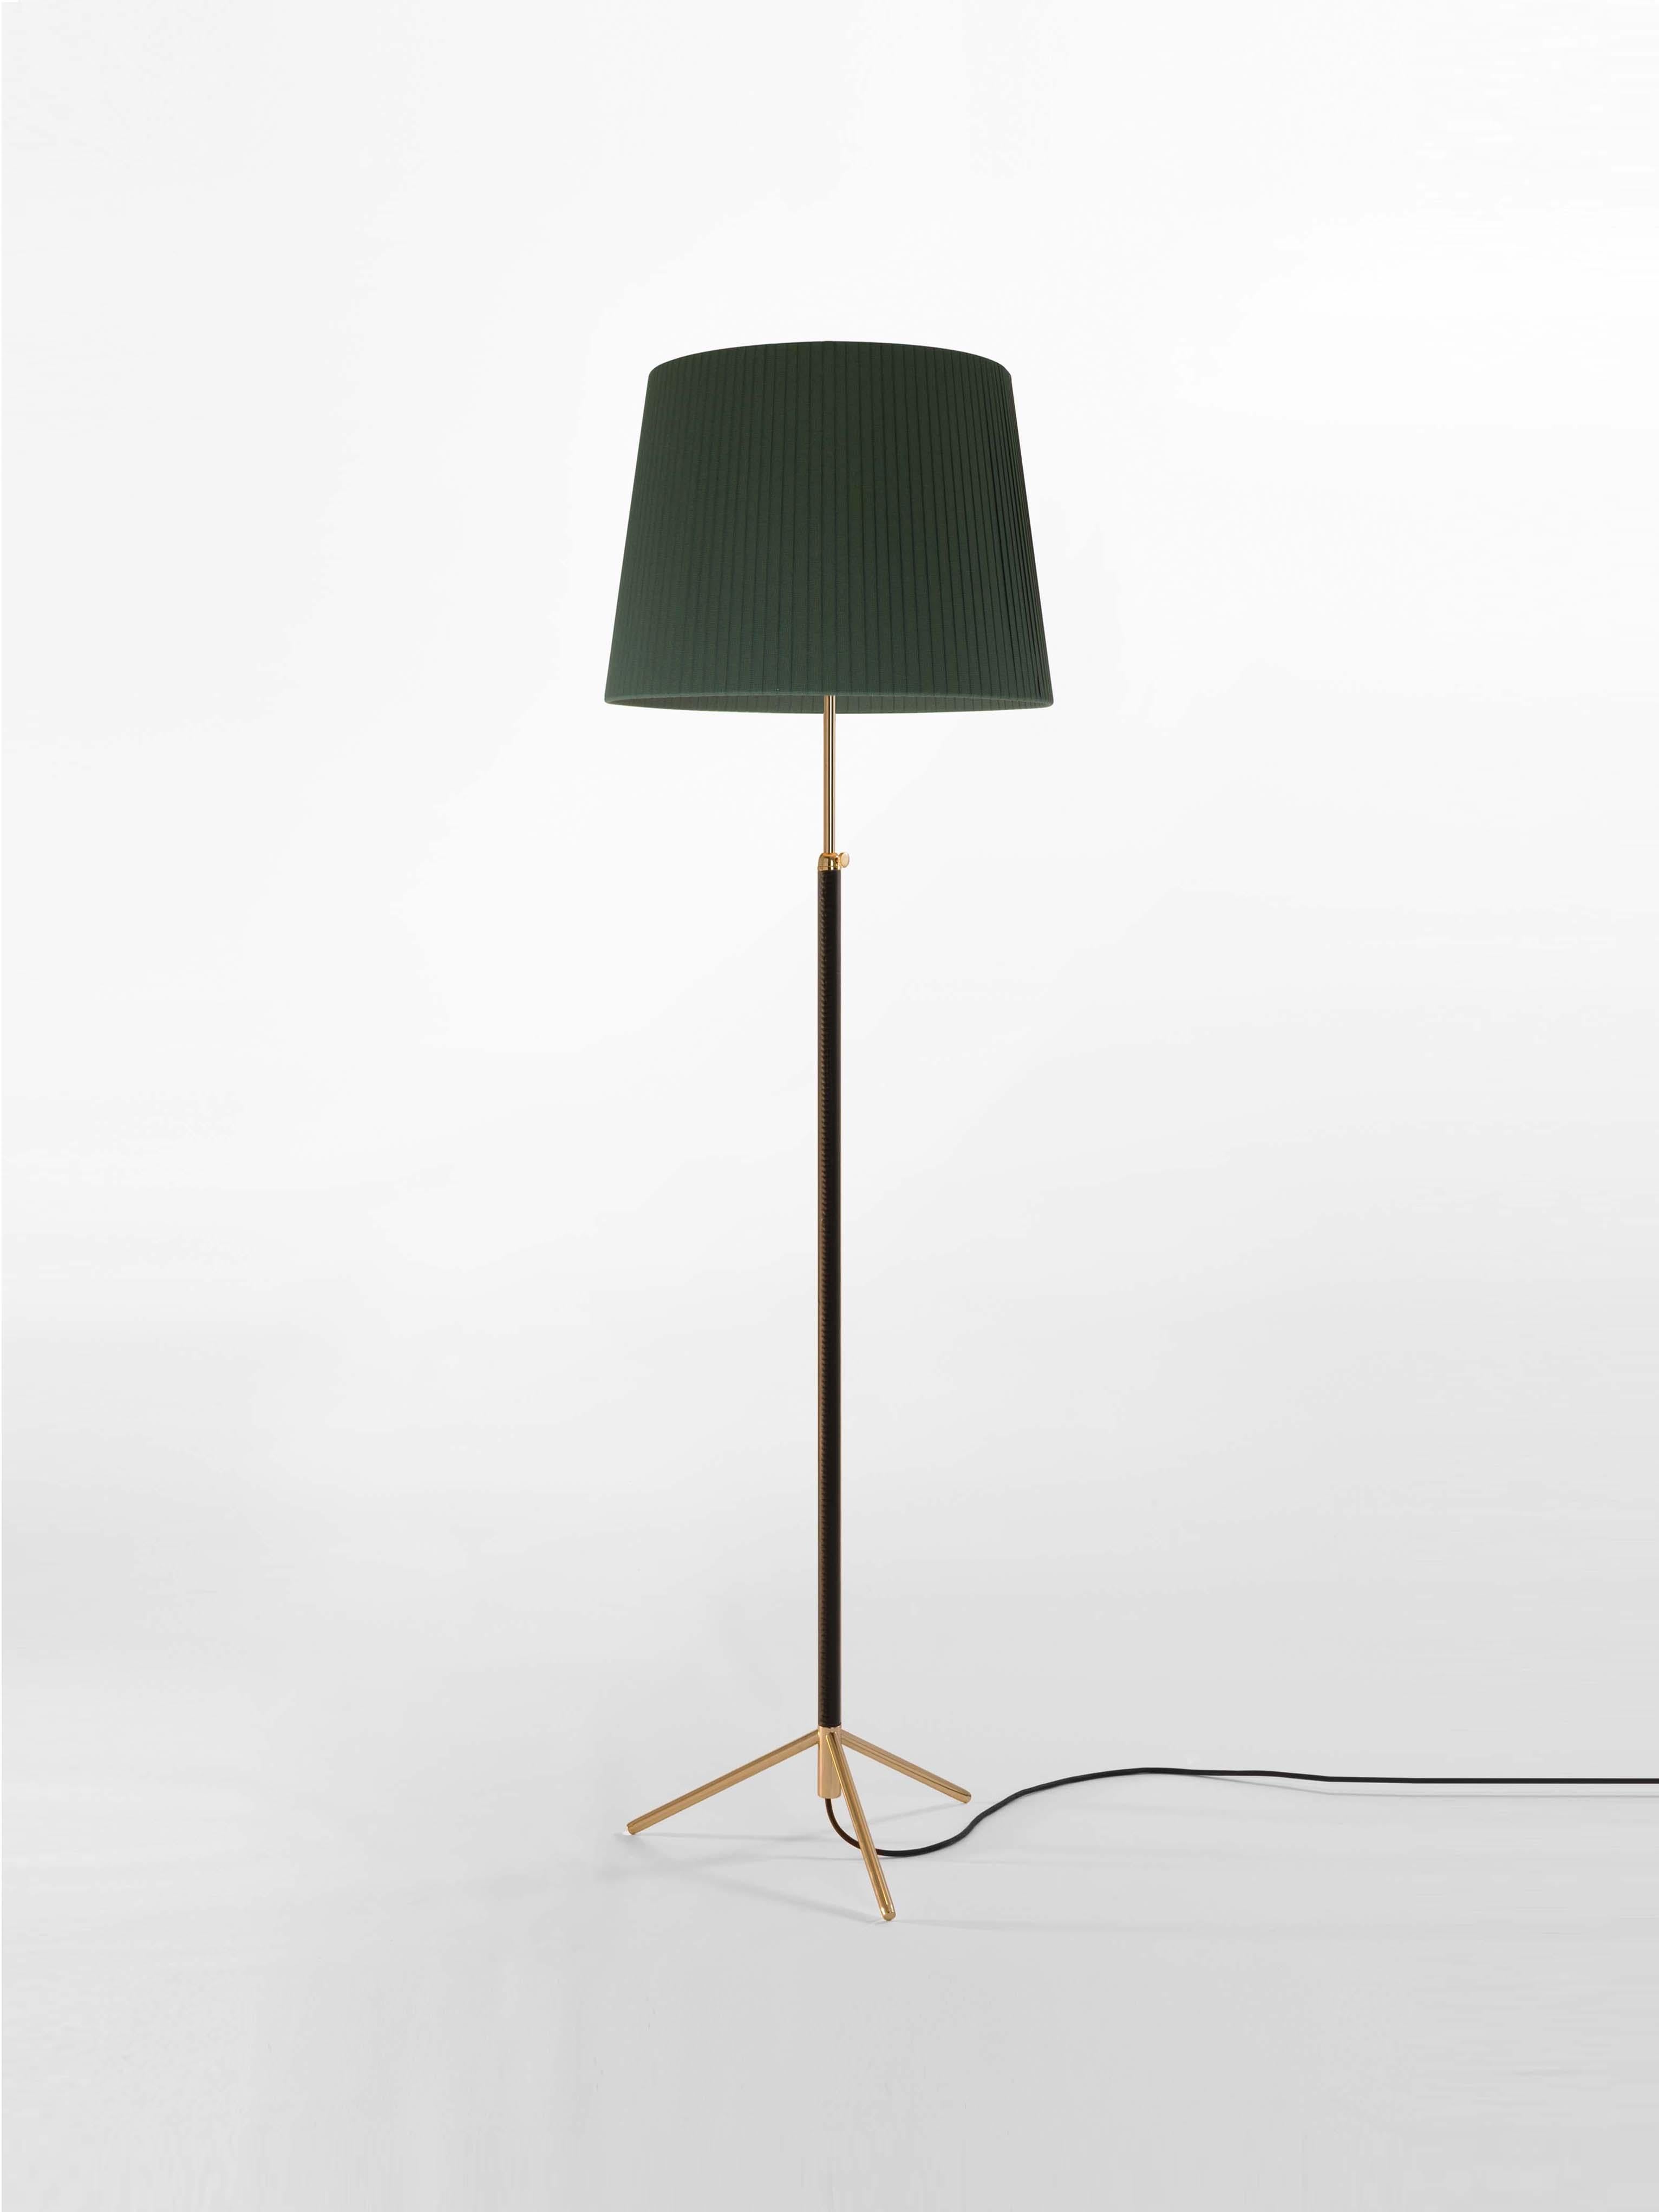 Green and brass Pie de Salón G1 floor lamp by Jaume Sans
Dimensions: D 45 x H 120-160 cm
Materials: Metal, leather, ribbon.
Available in chrome-plated or polished brass structure.
Available in other shade colors and sizes.

This slender